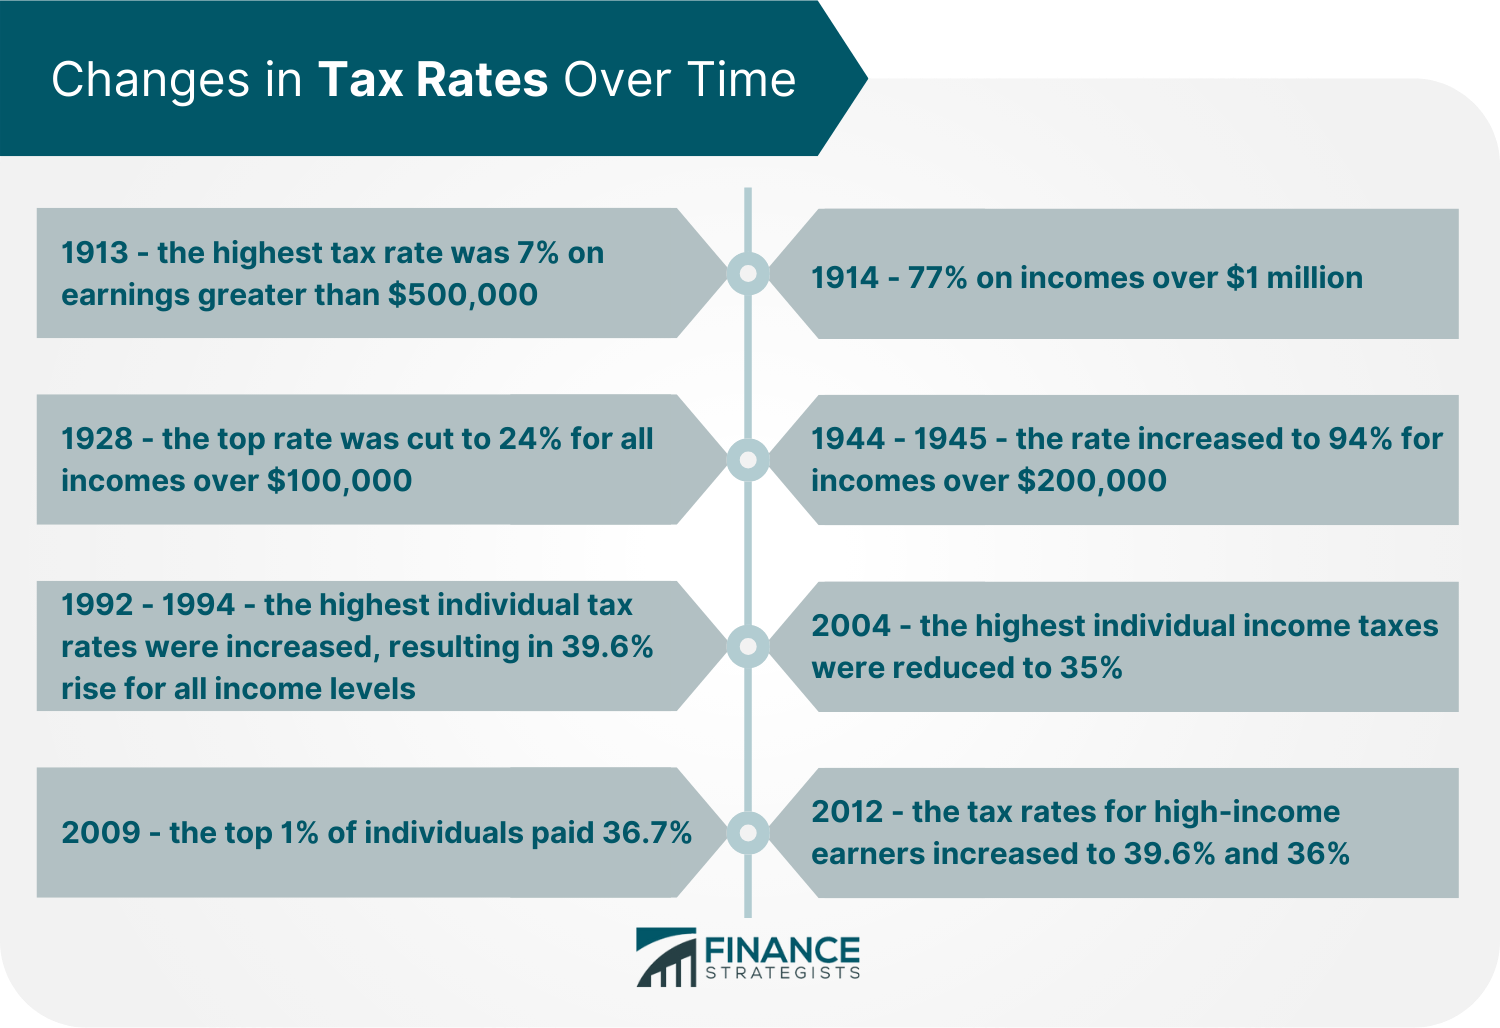 Changes in Tax Rates Over Time